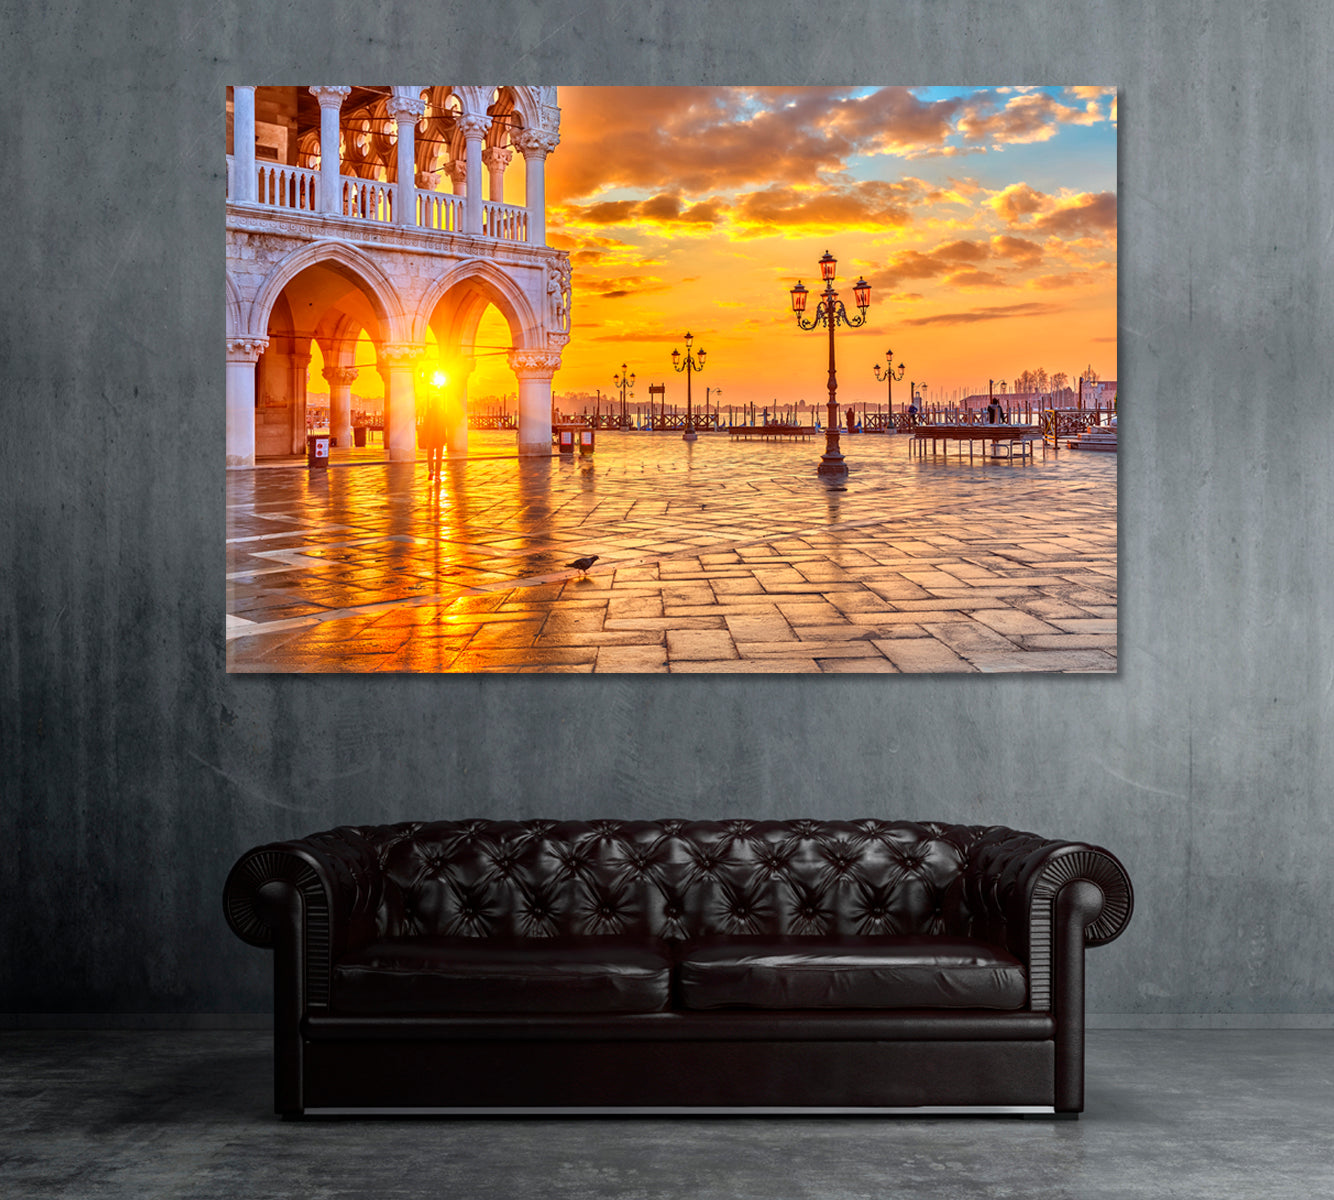 St Mark's Square Piazza San Marco Venice Italy Canvas Print ArtLexy 1 Panel 24"x16" inches 